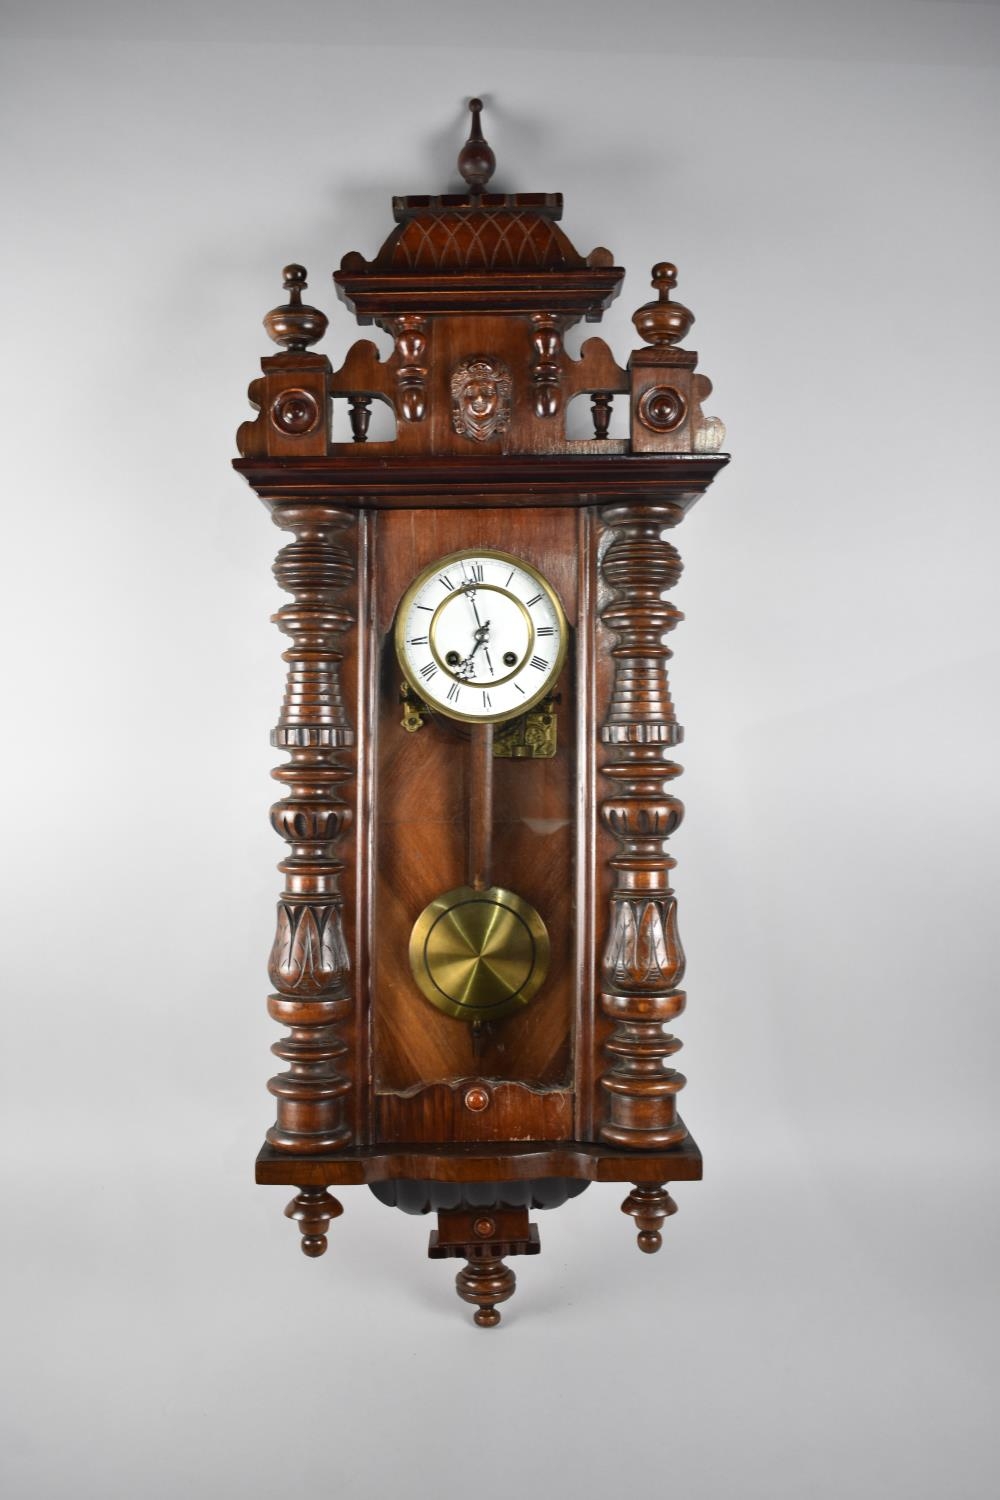 An Edwardian Mahogany Vienna Style Wall Clock with Carved Half Pilaster Decoration, Eight Day